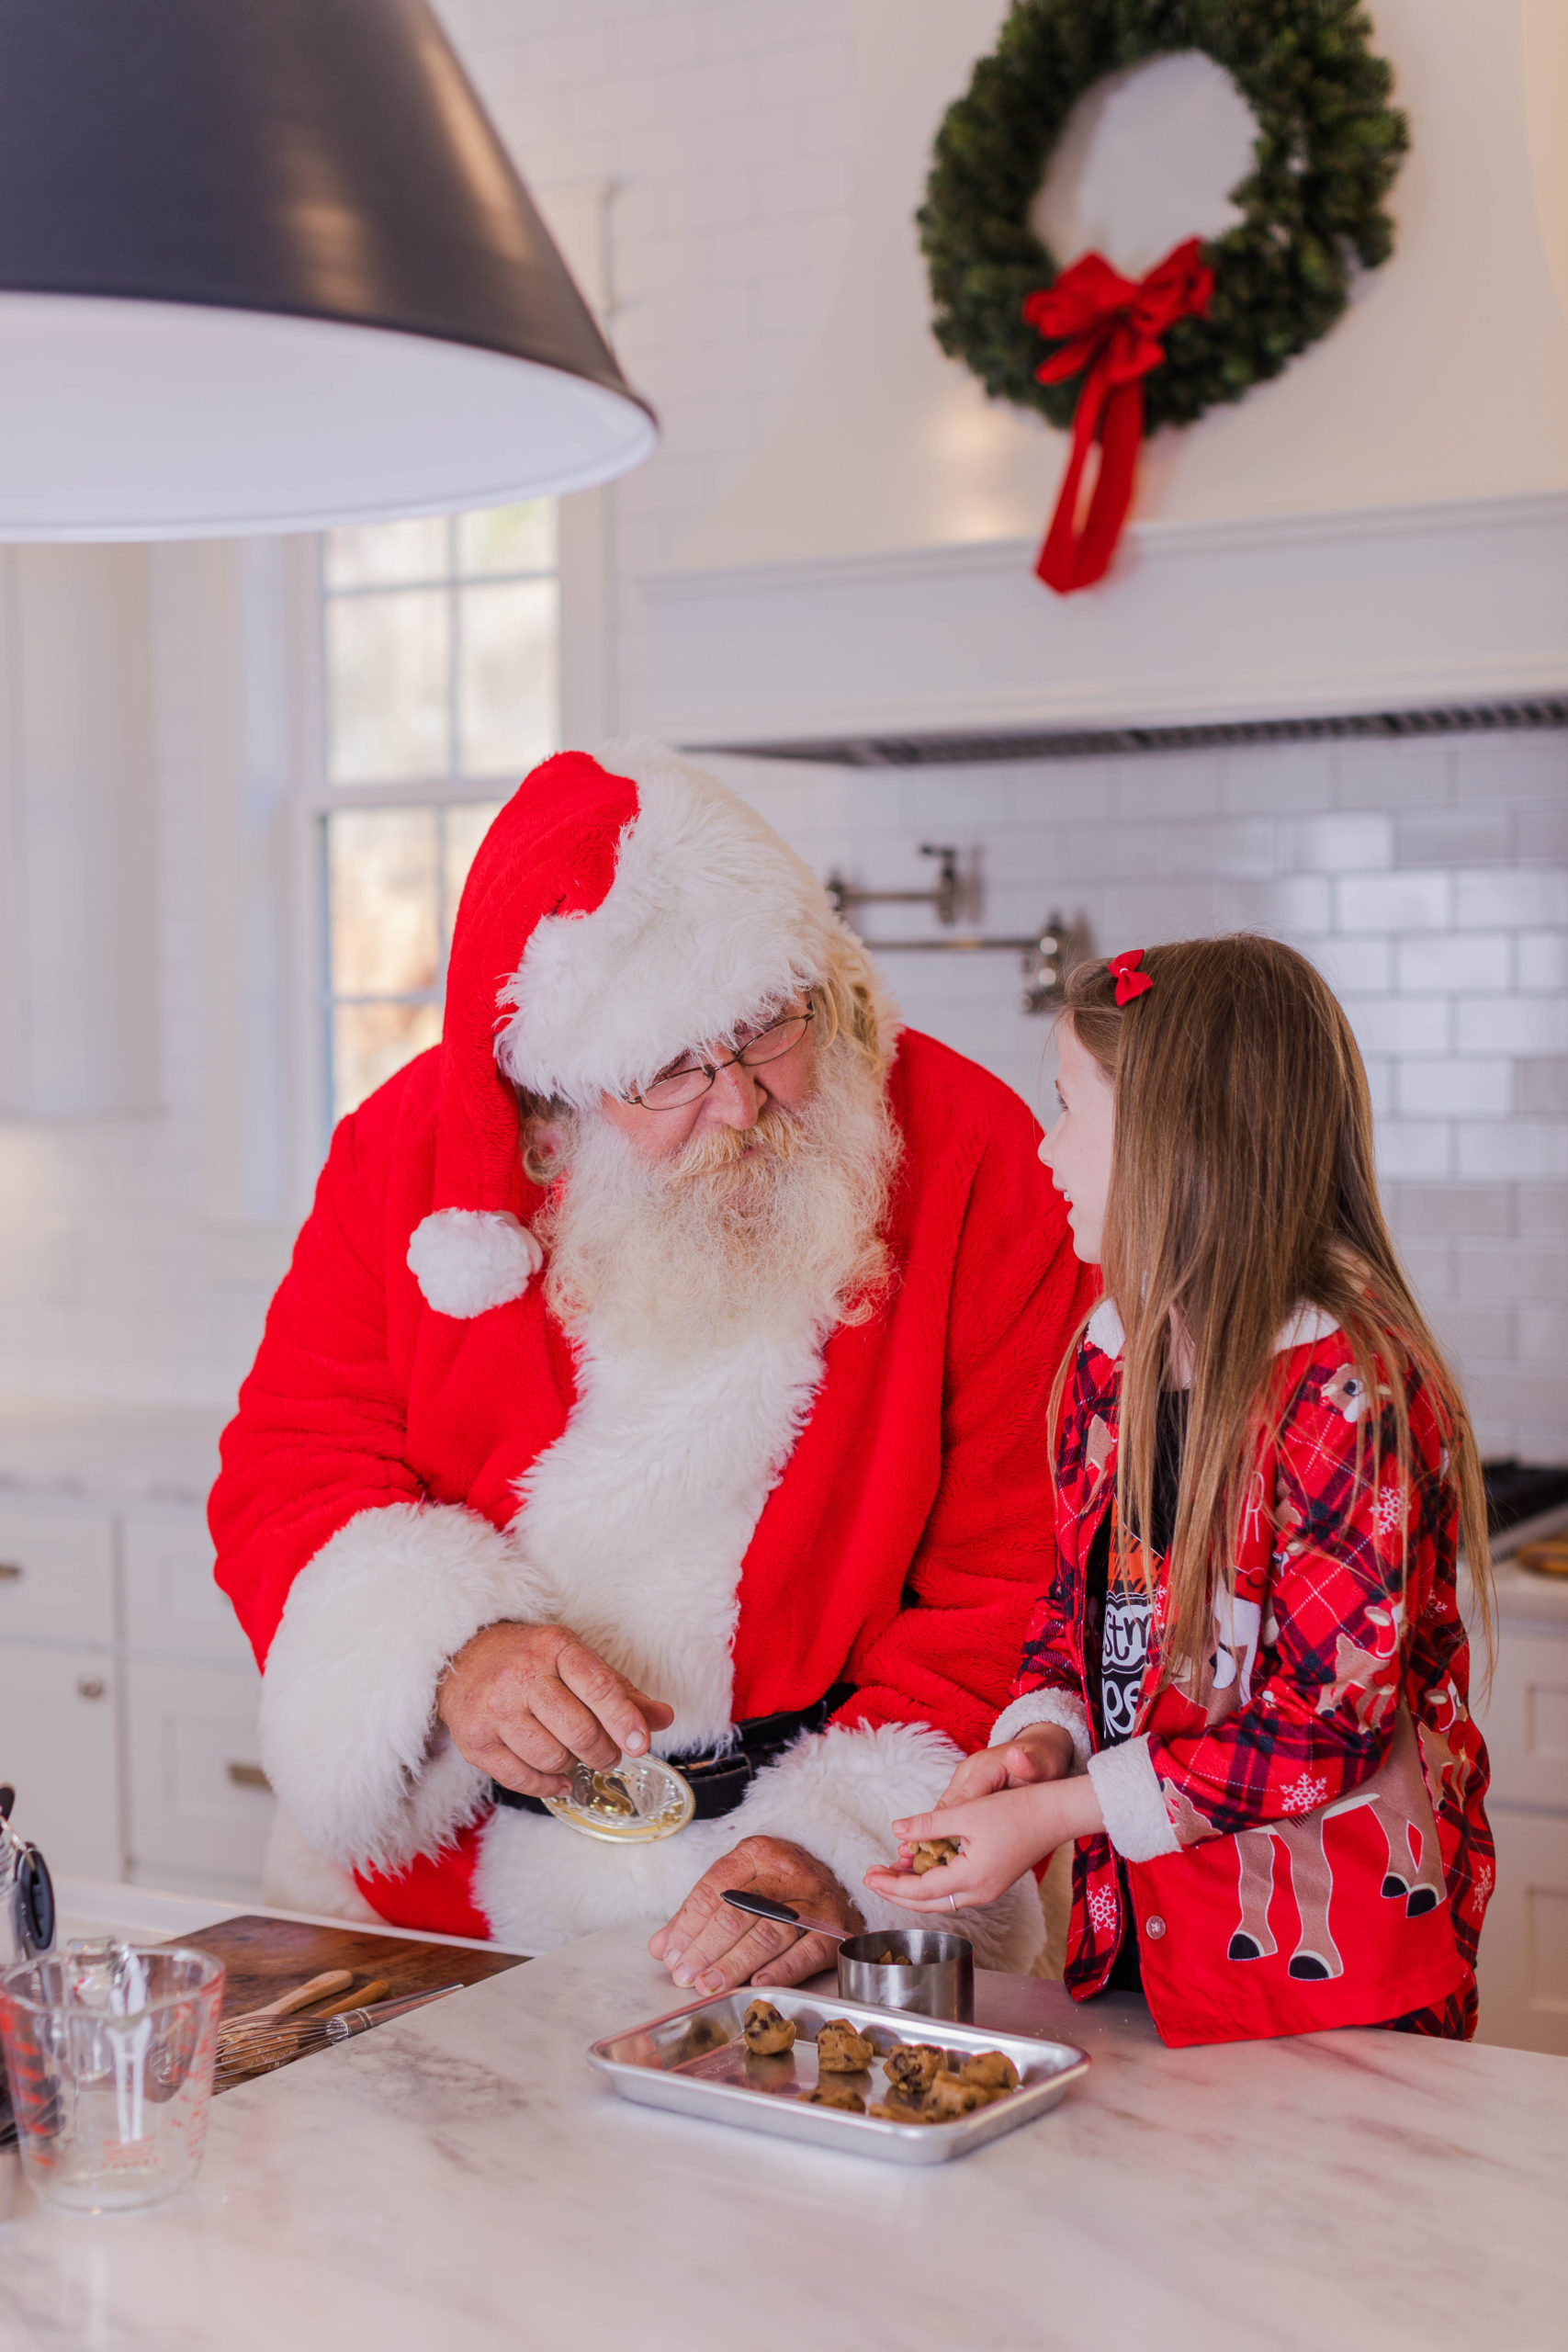 Baking with Santa Chattanooga 2022 in Flintstone, Georgia by Elle Bea Photography